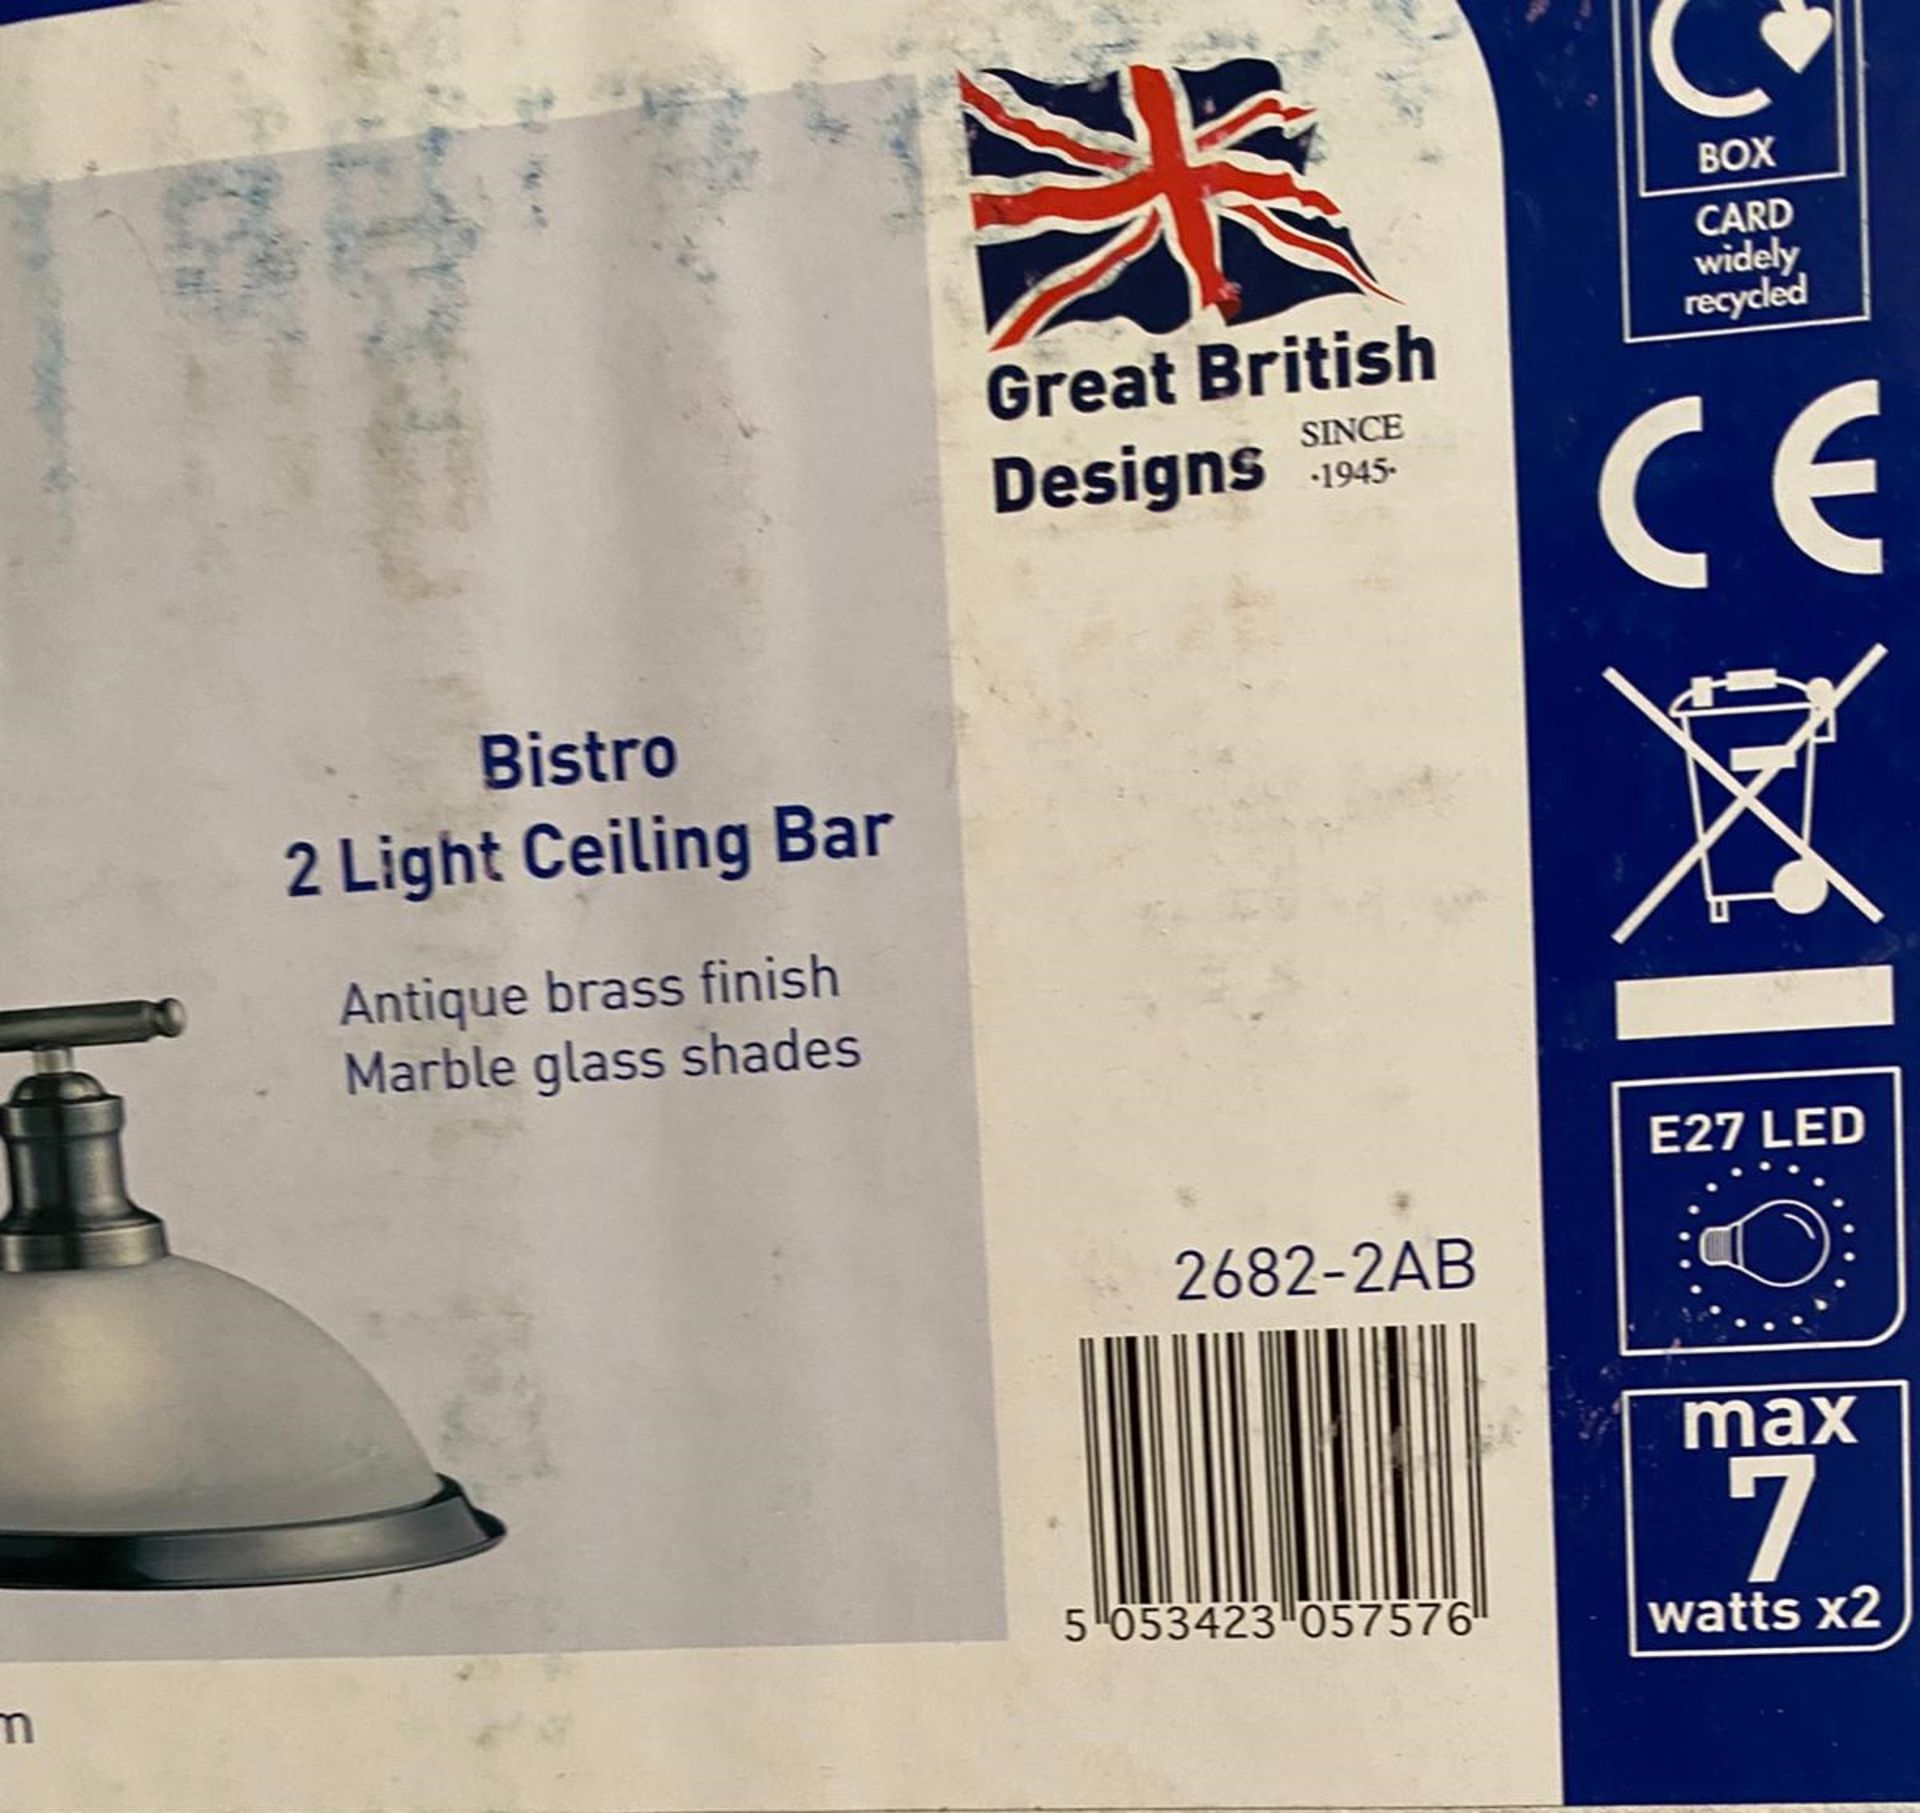 1 x Searchlight Bistro 2 Light Ceiling Bar in Antique Brass - Ref: 2682-2AB - New Boxed - RRP: £115 - Image 2 of 3